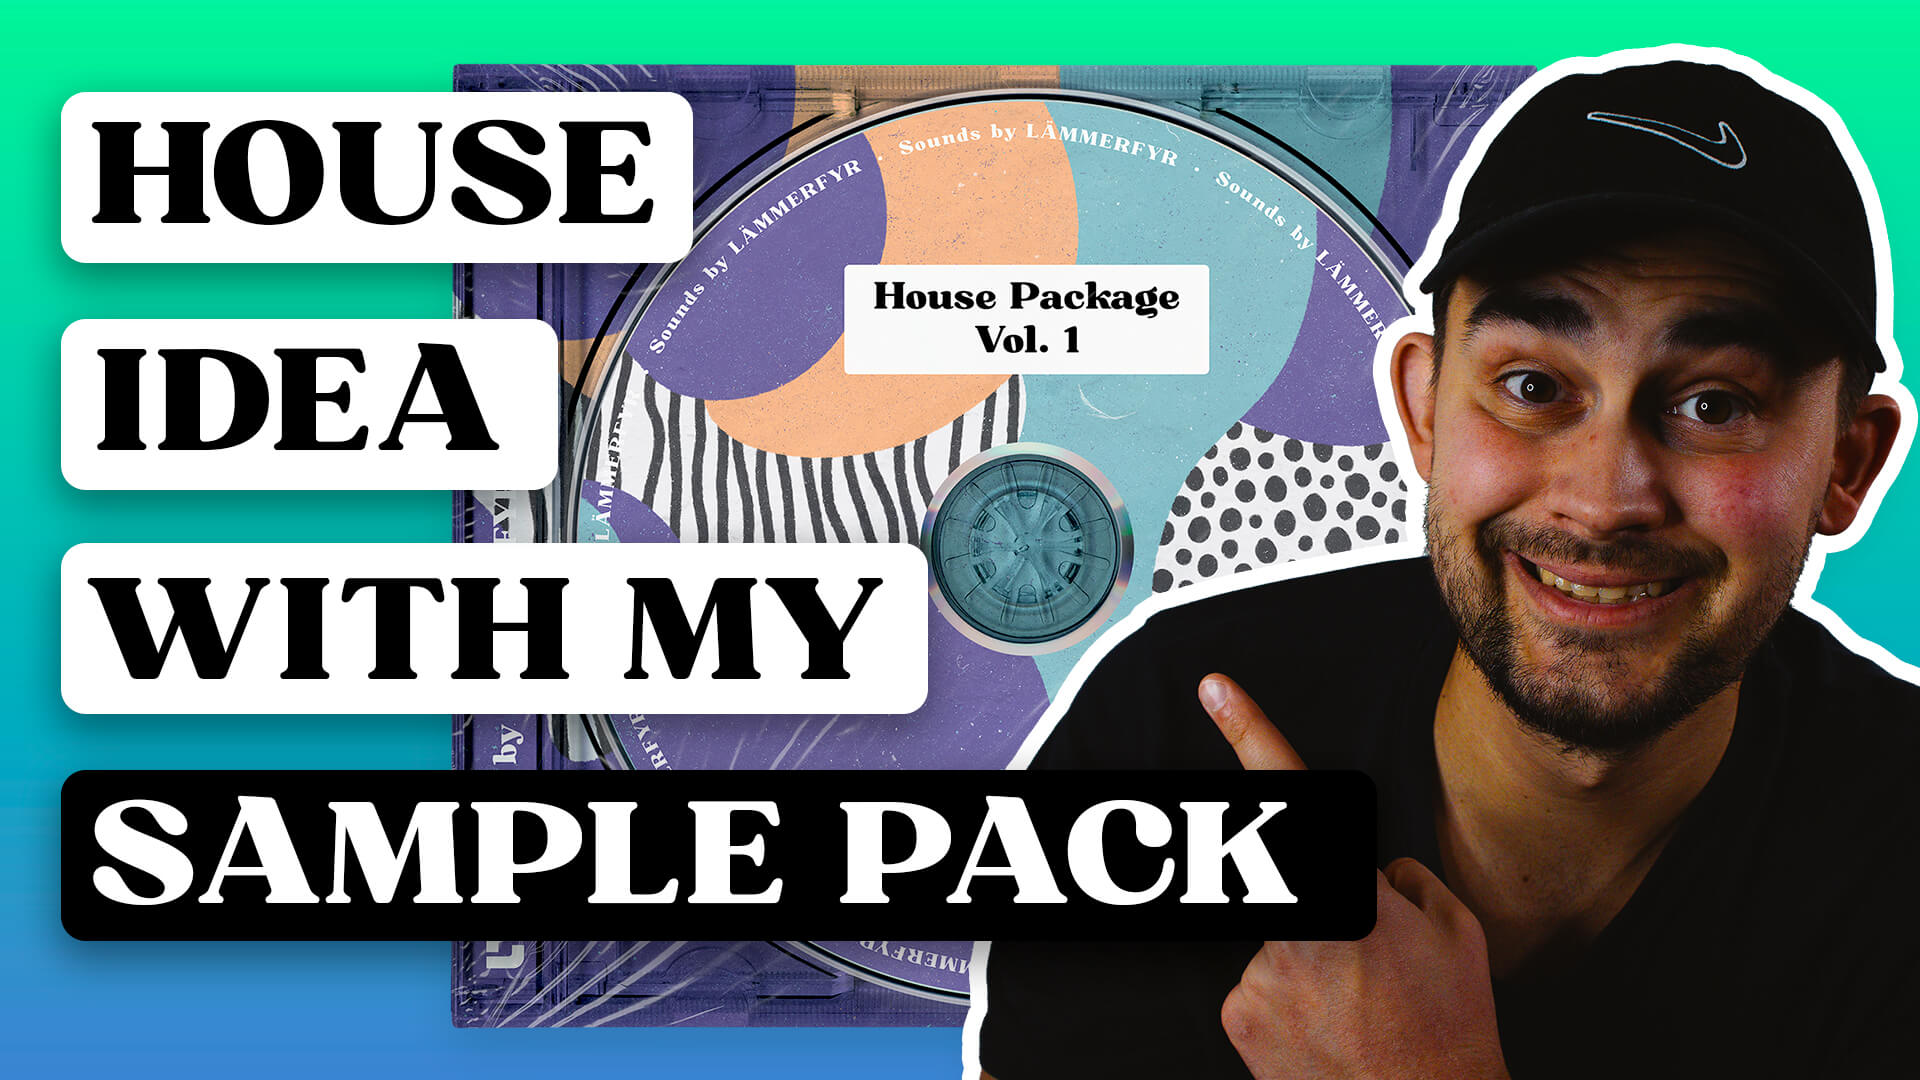 Load video: Made this Idea with my latest SAMPLE PACK | House Package Vol. 1